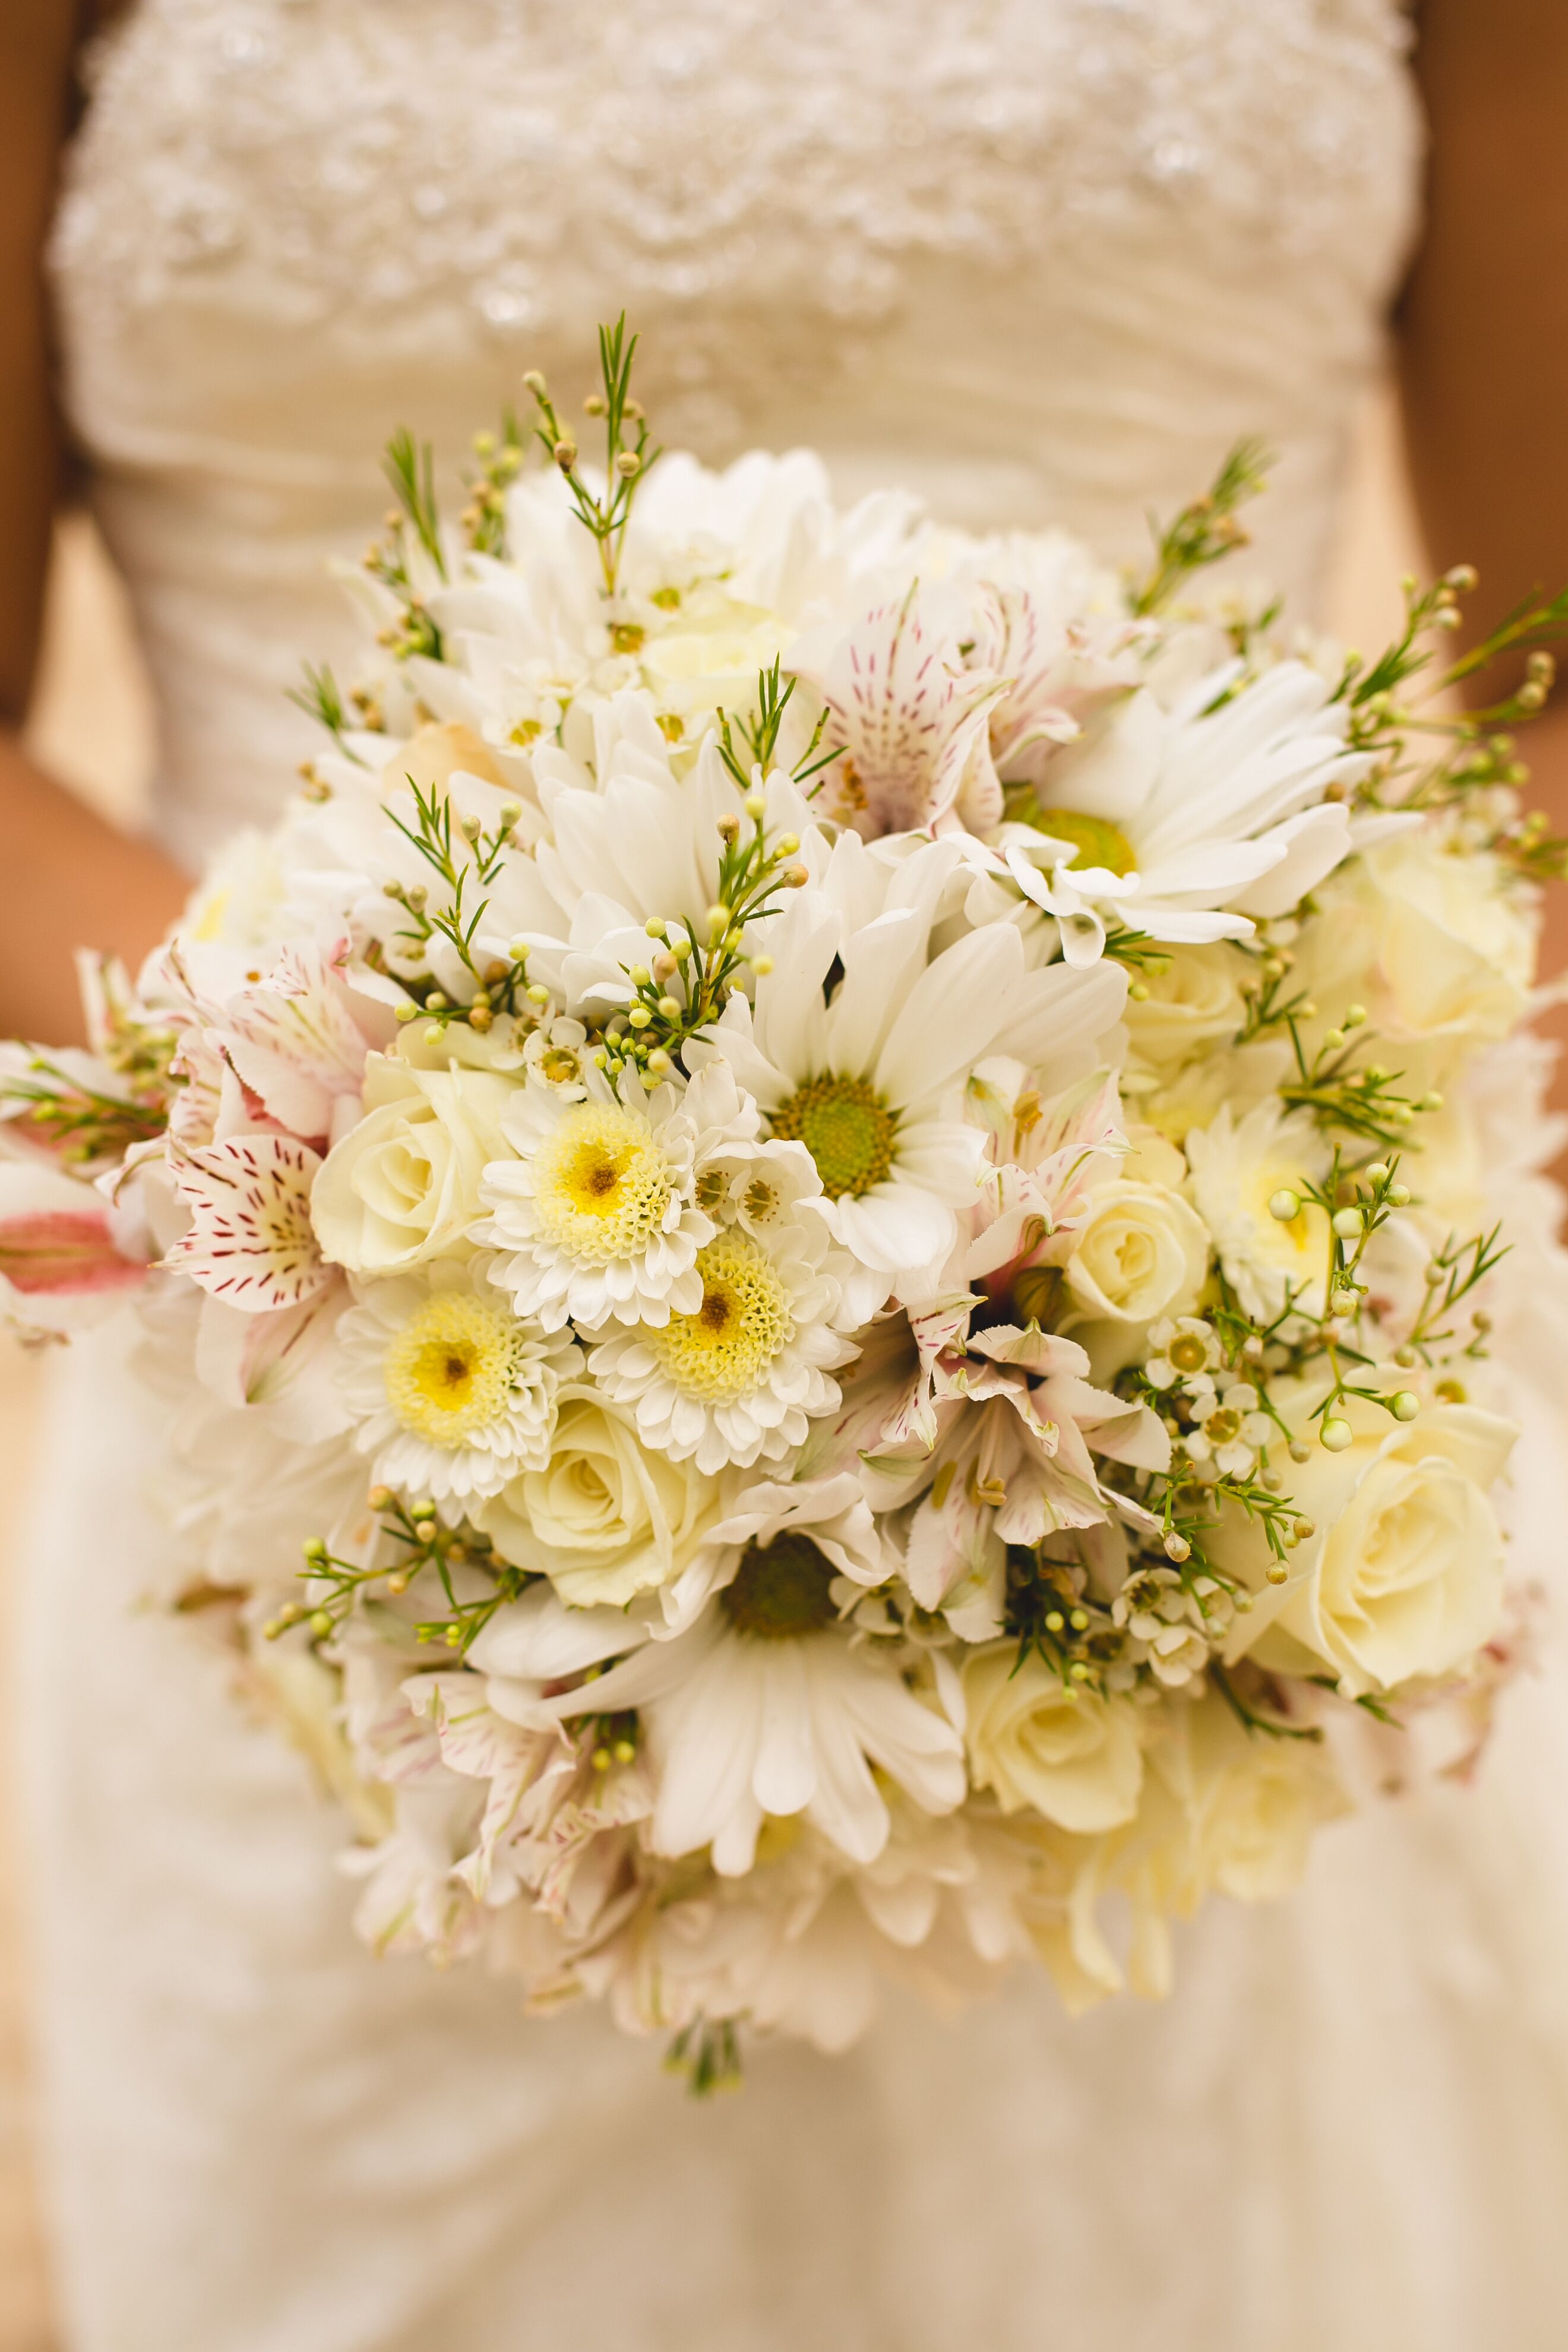 The Symbolism and Meaning Behind Wedding Flowers